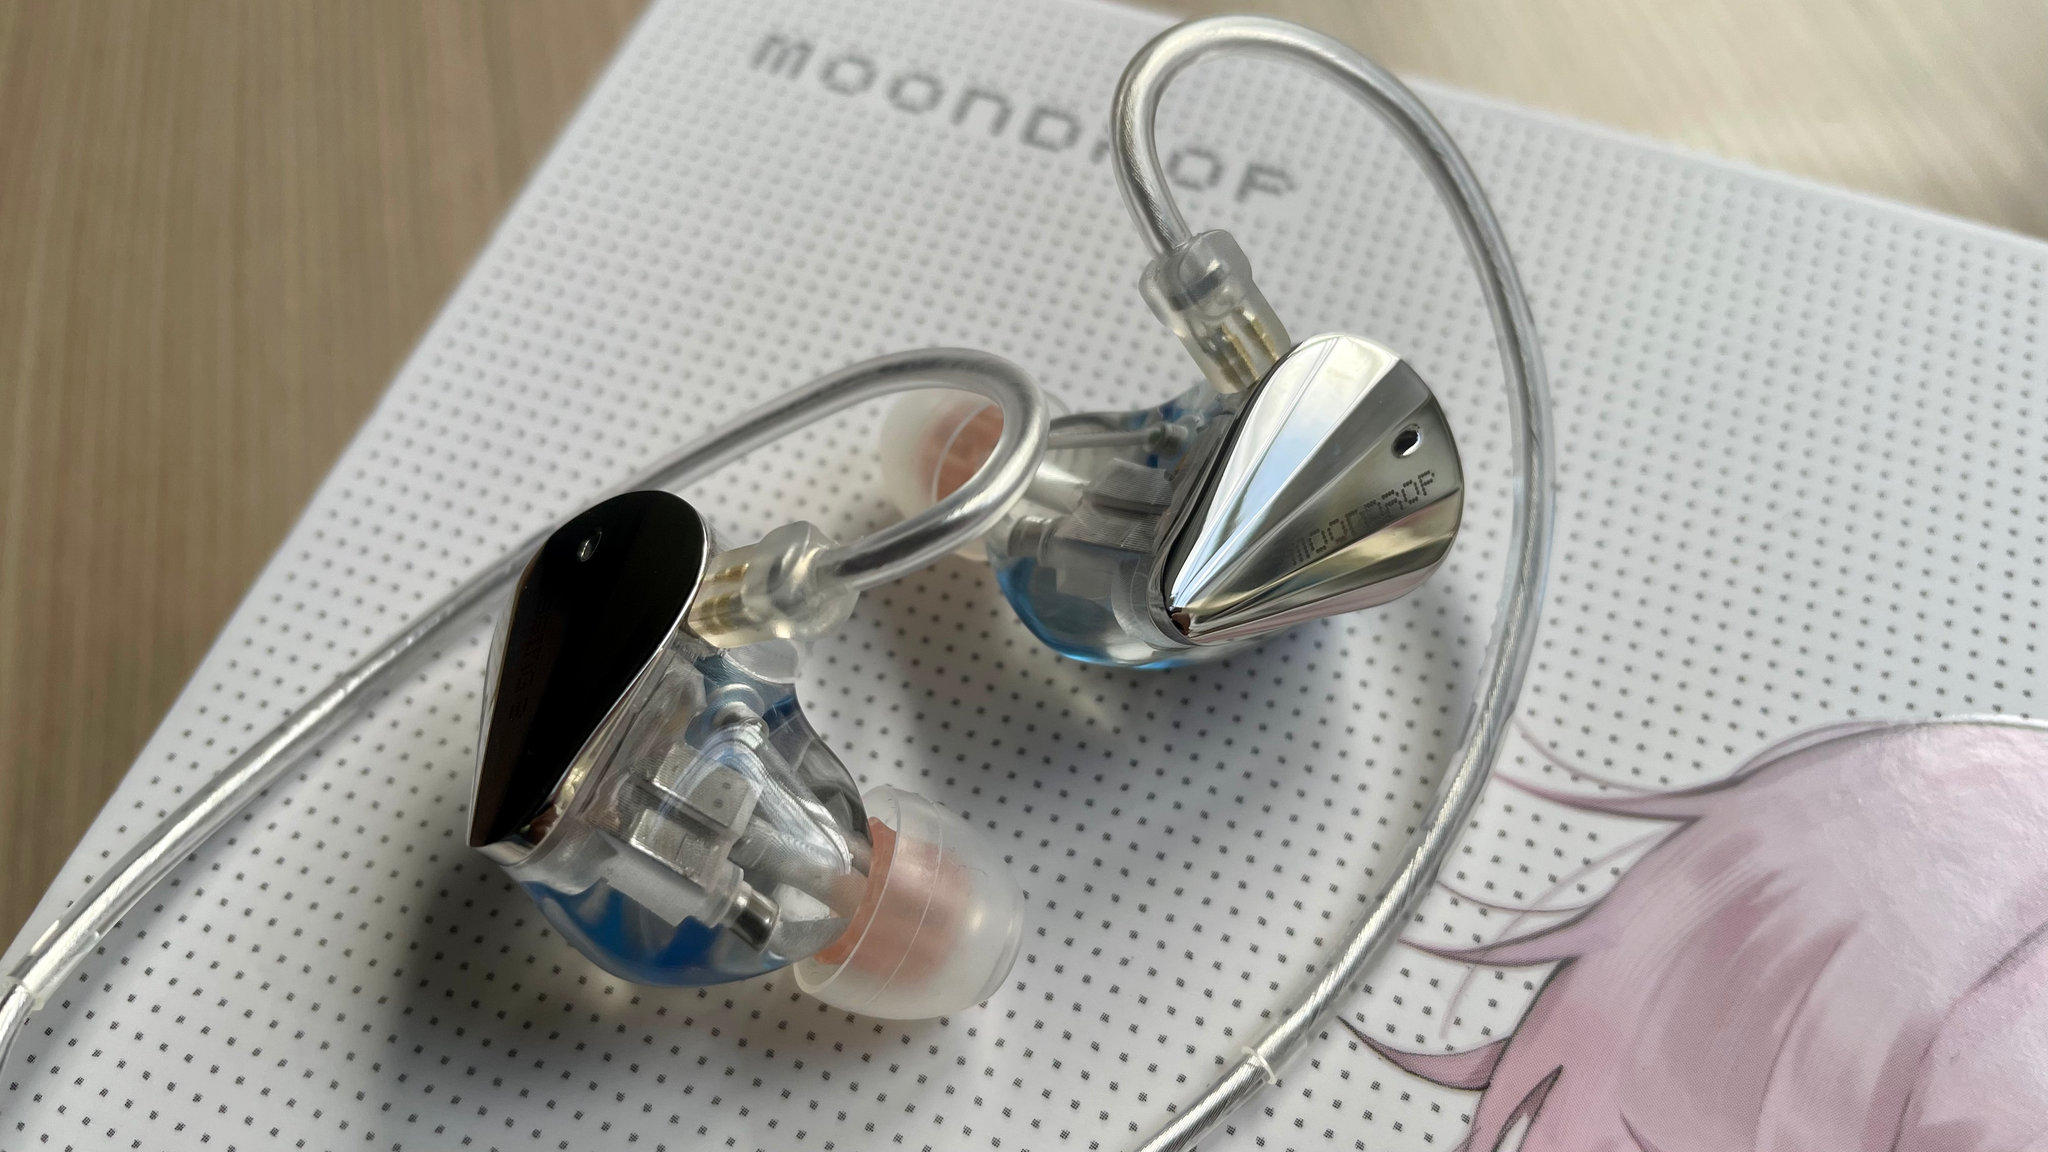 Moondrop Blessing 3 In-Ear Monitors Review